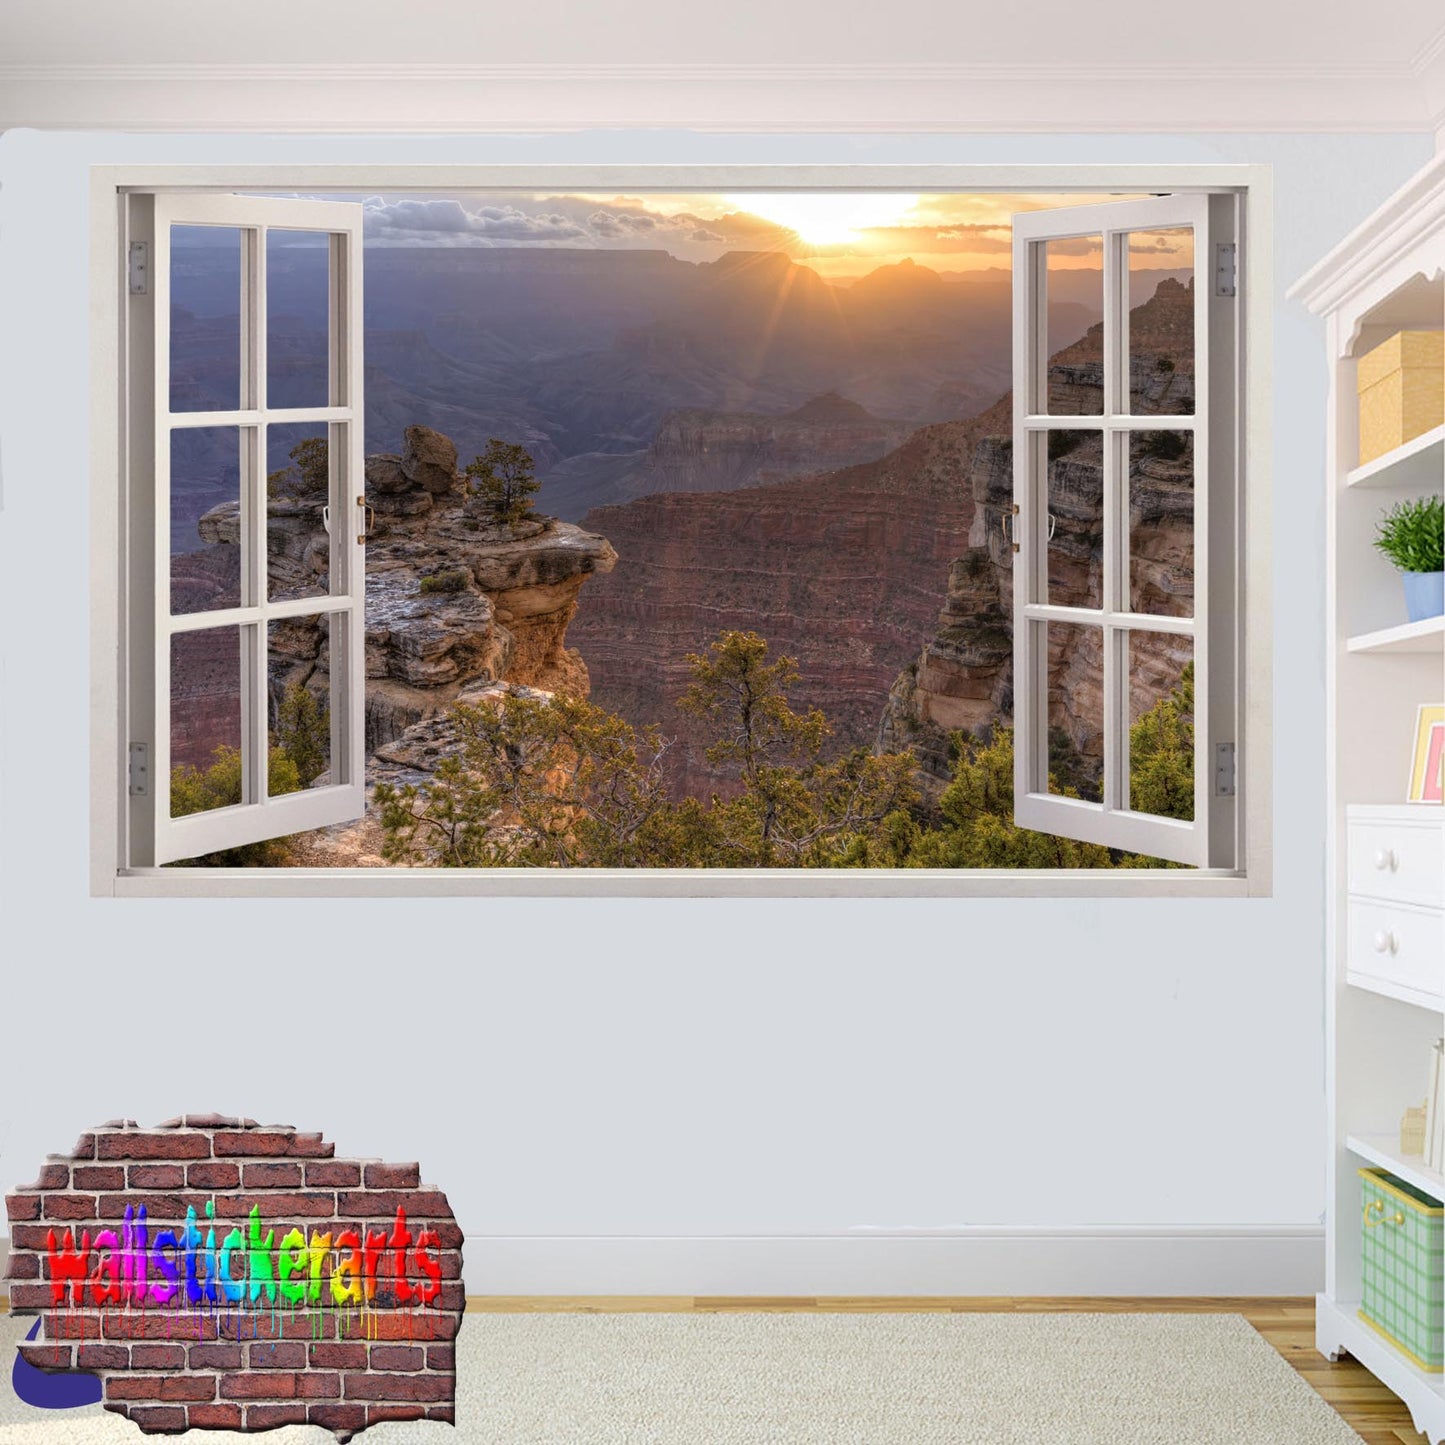 Sunset on Grand Canyon 3d Art Wall Sticker Mural Room Office Shop Decoration Decal